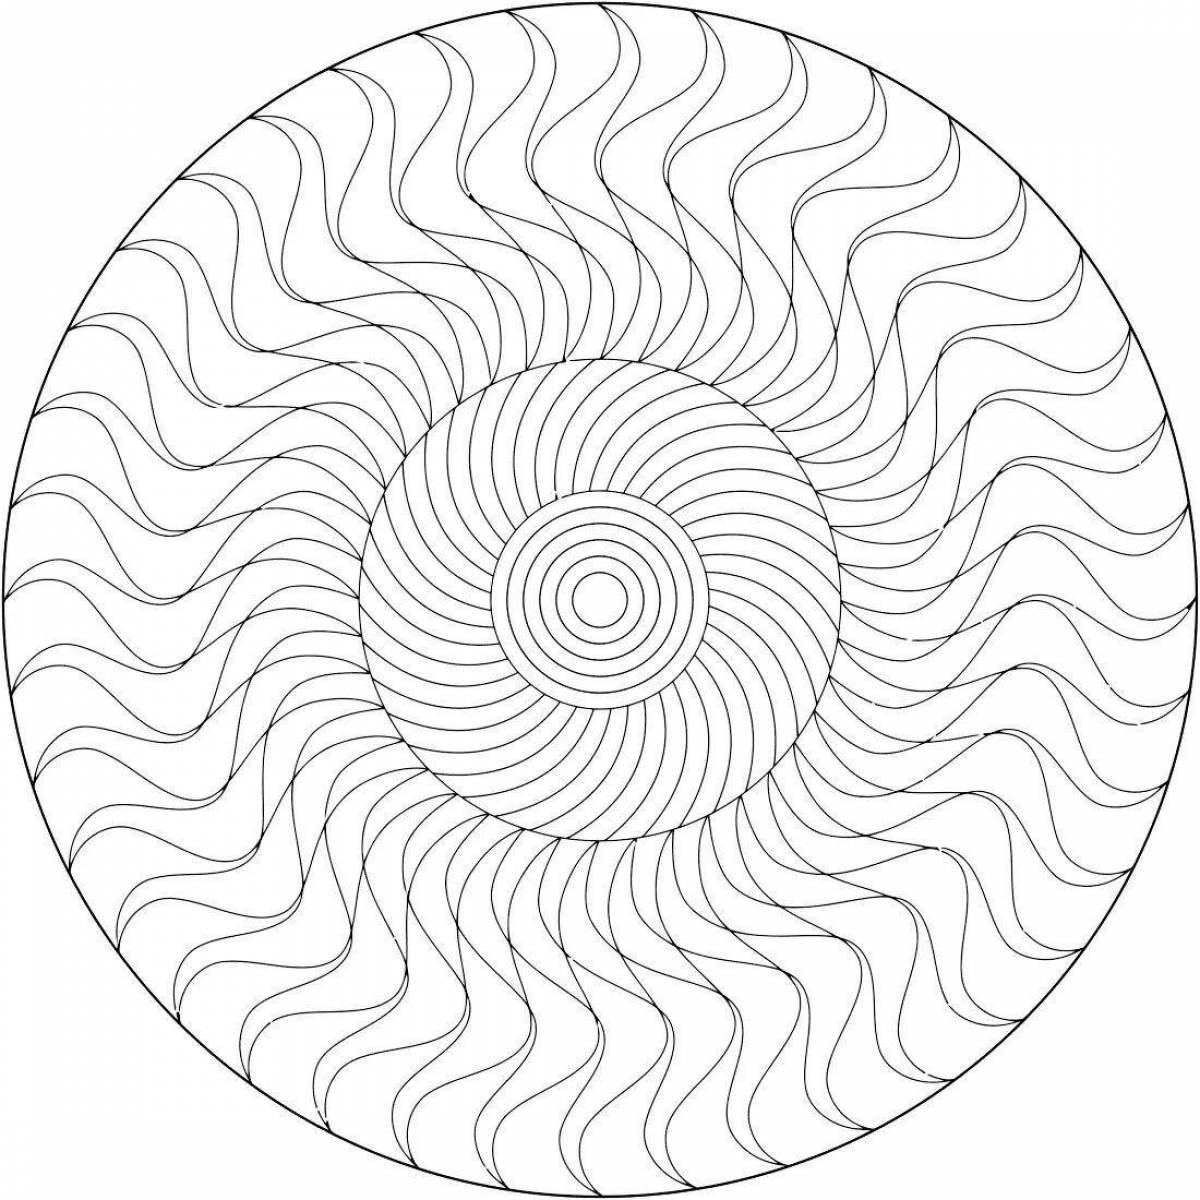 Tempting helix coloring page